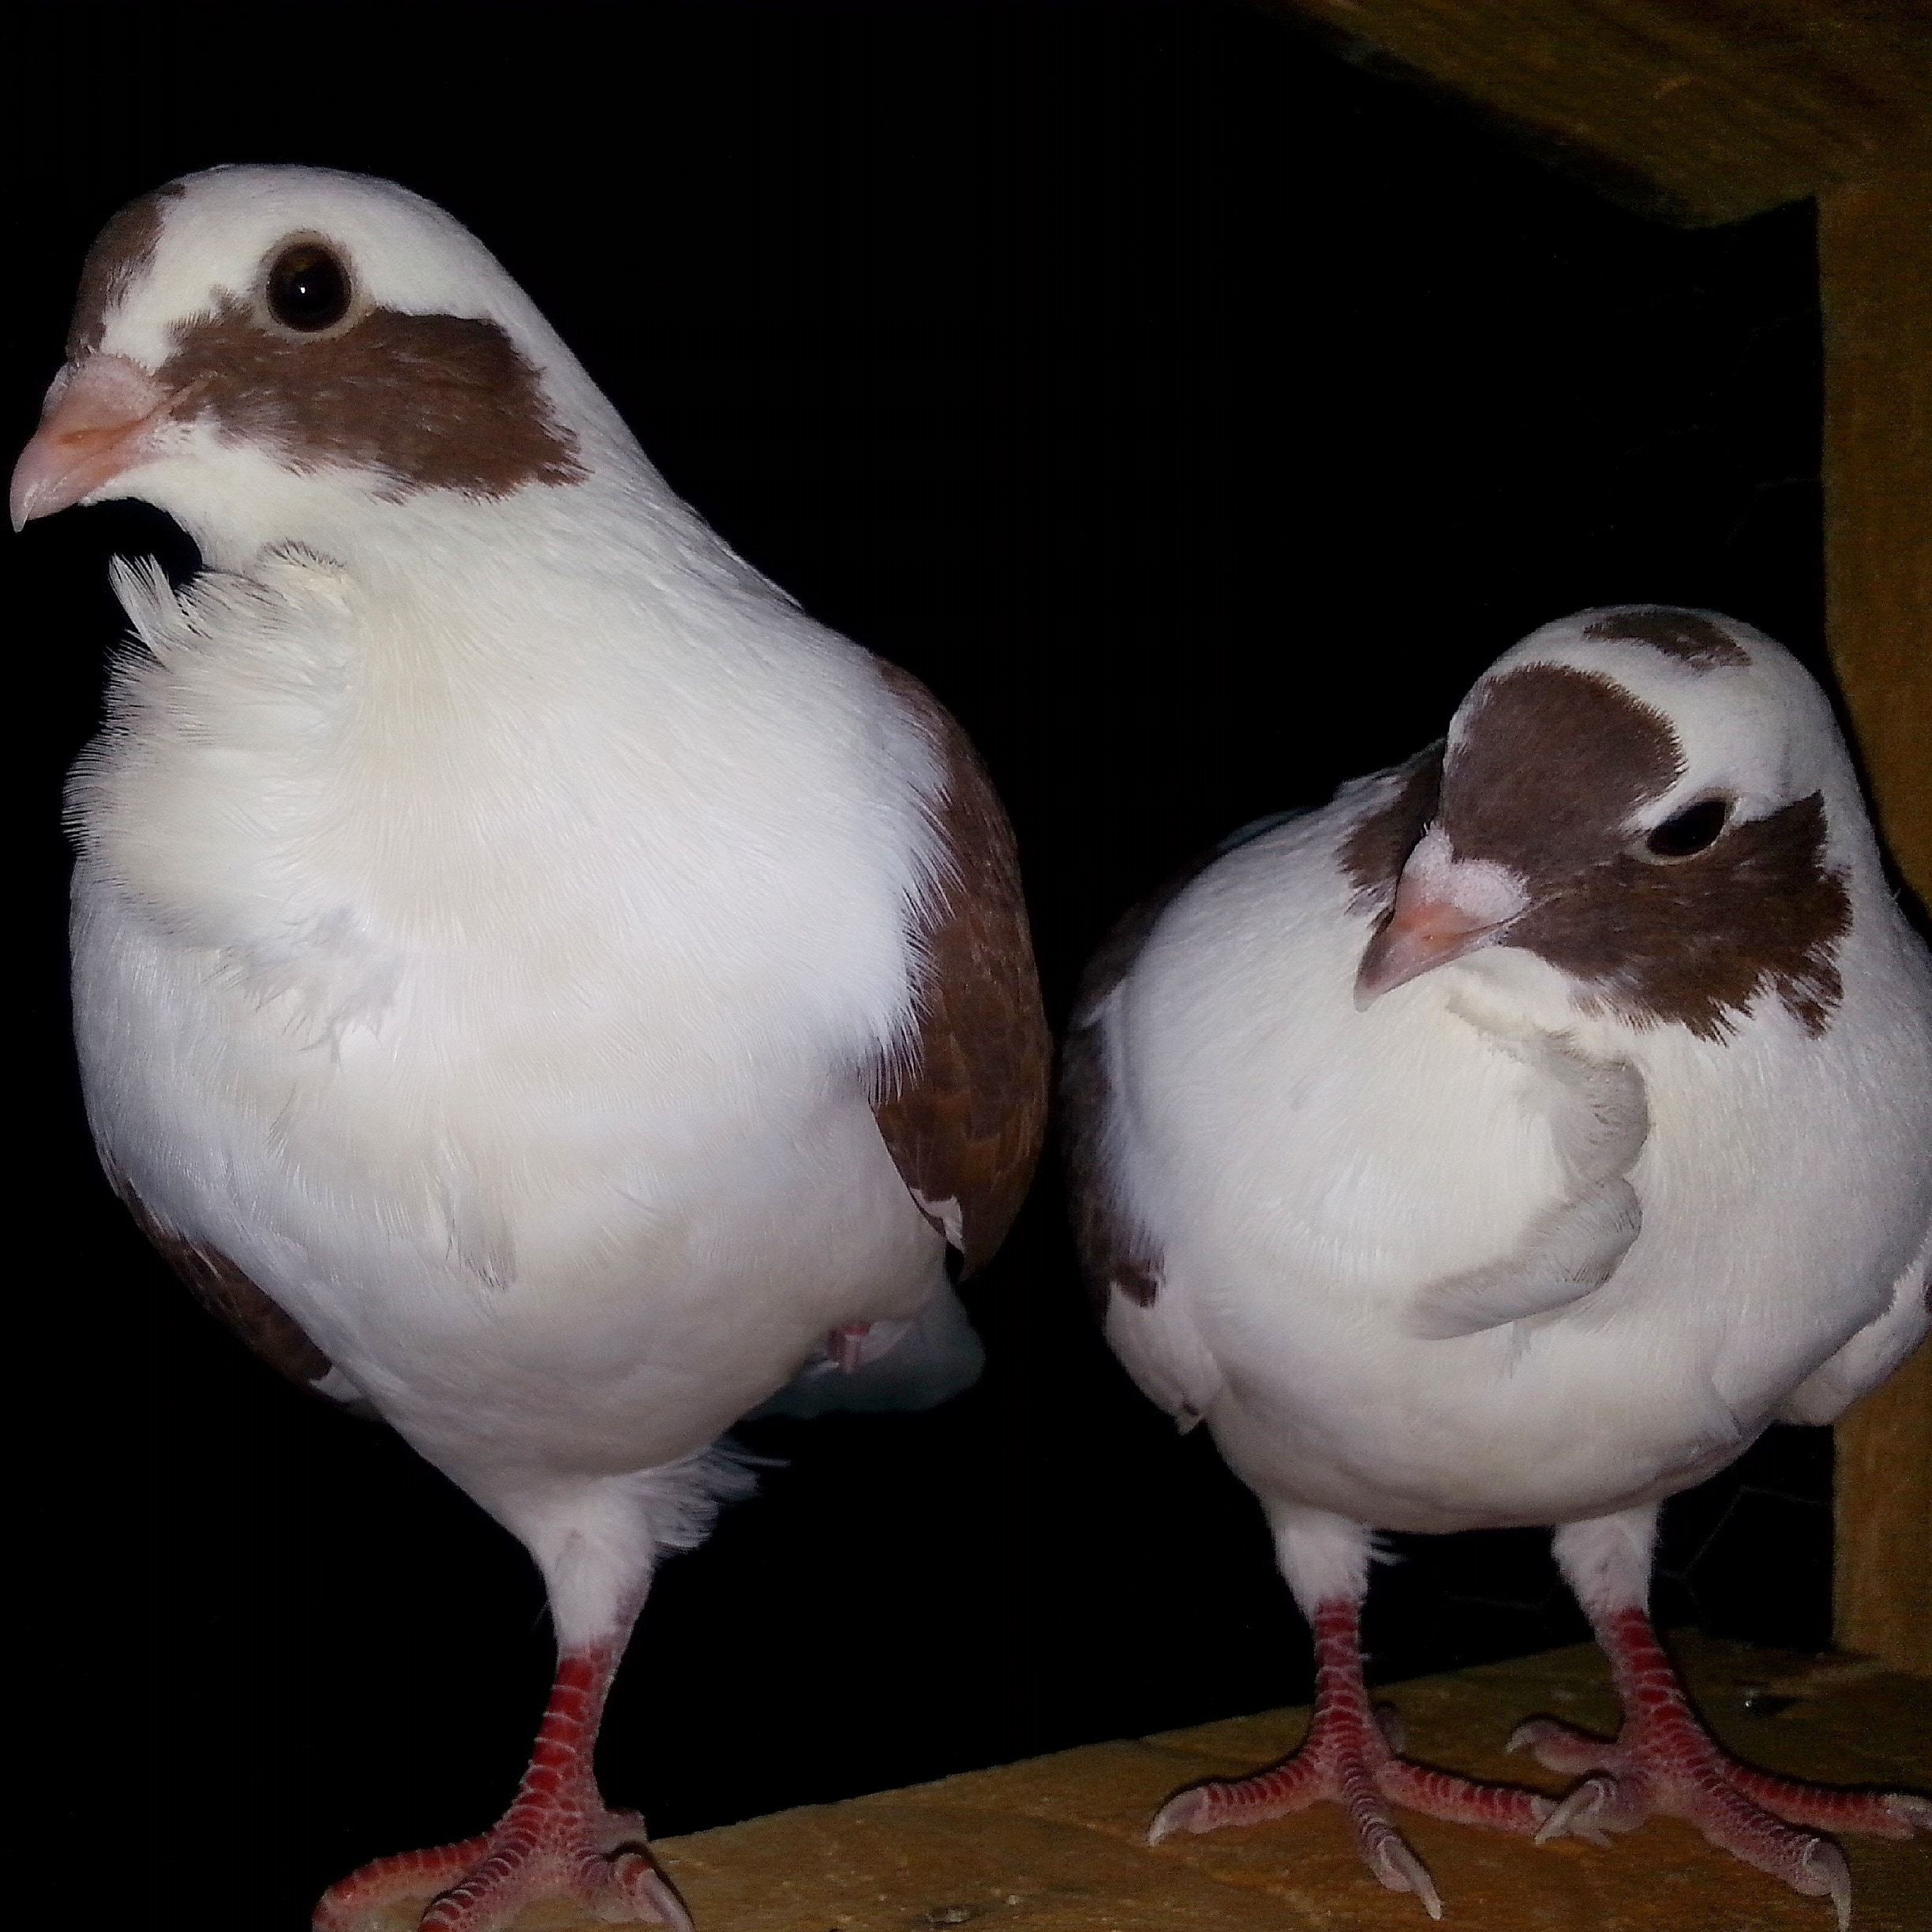 2 brown-and-white pigeons standing on cardboard box